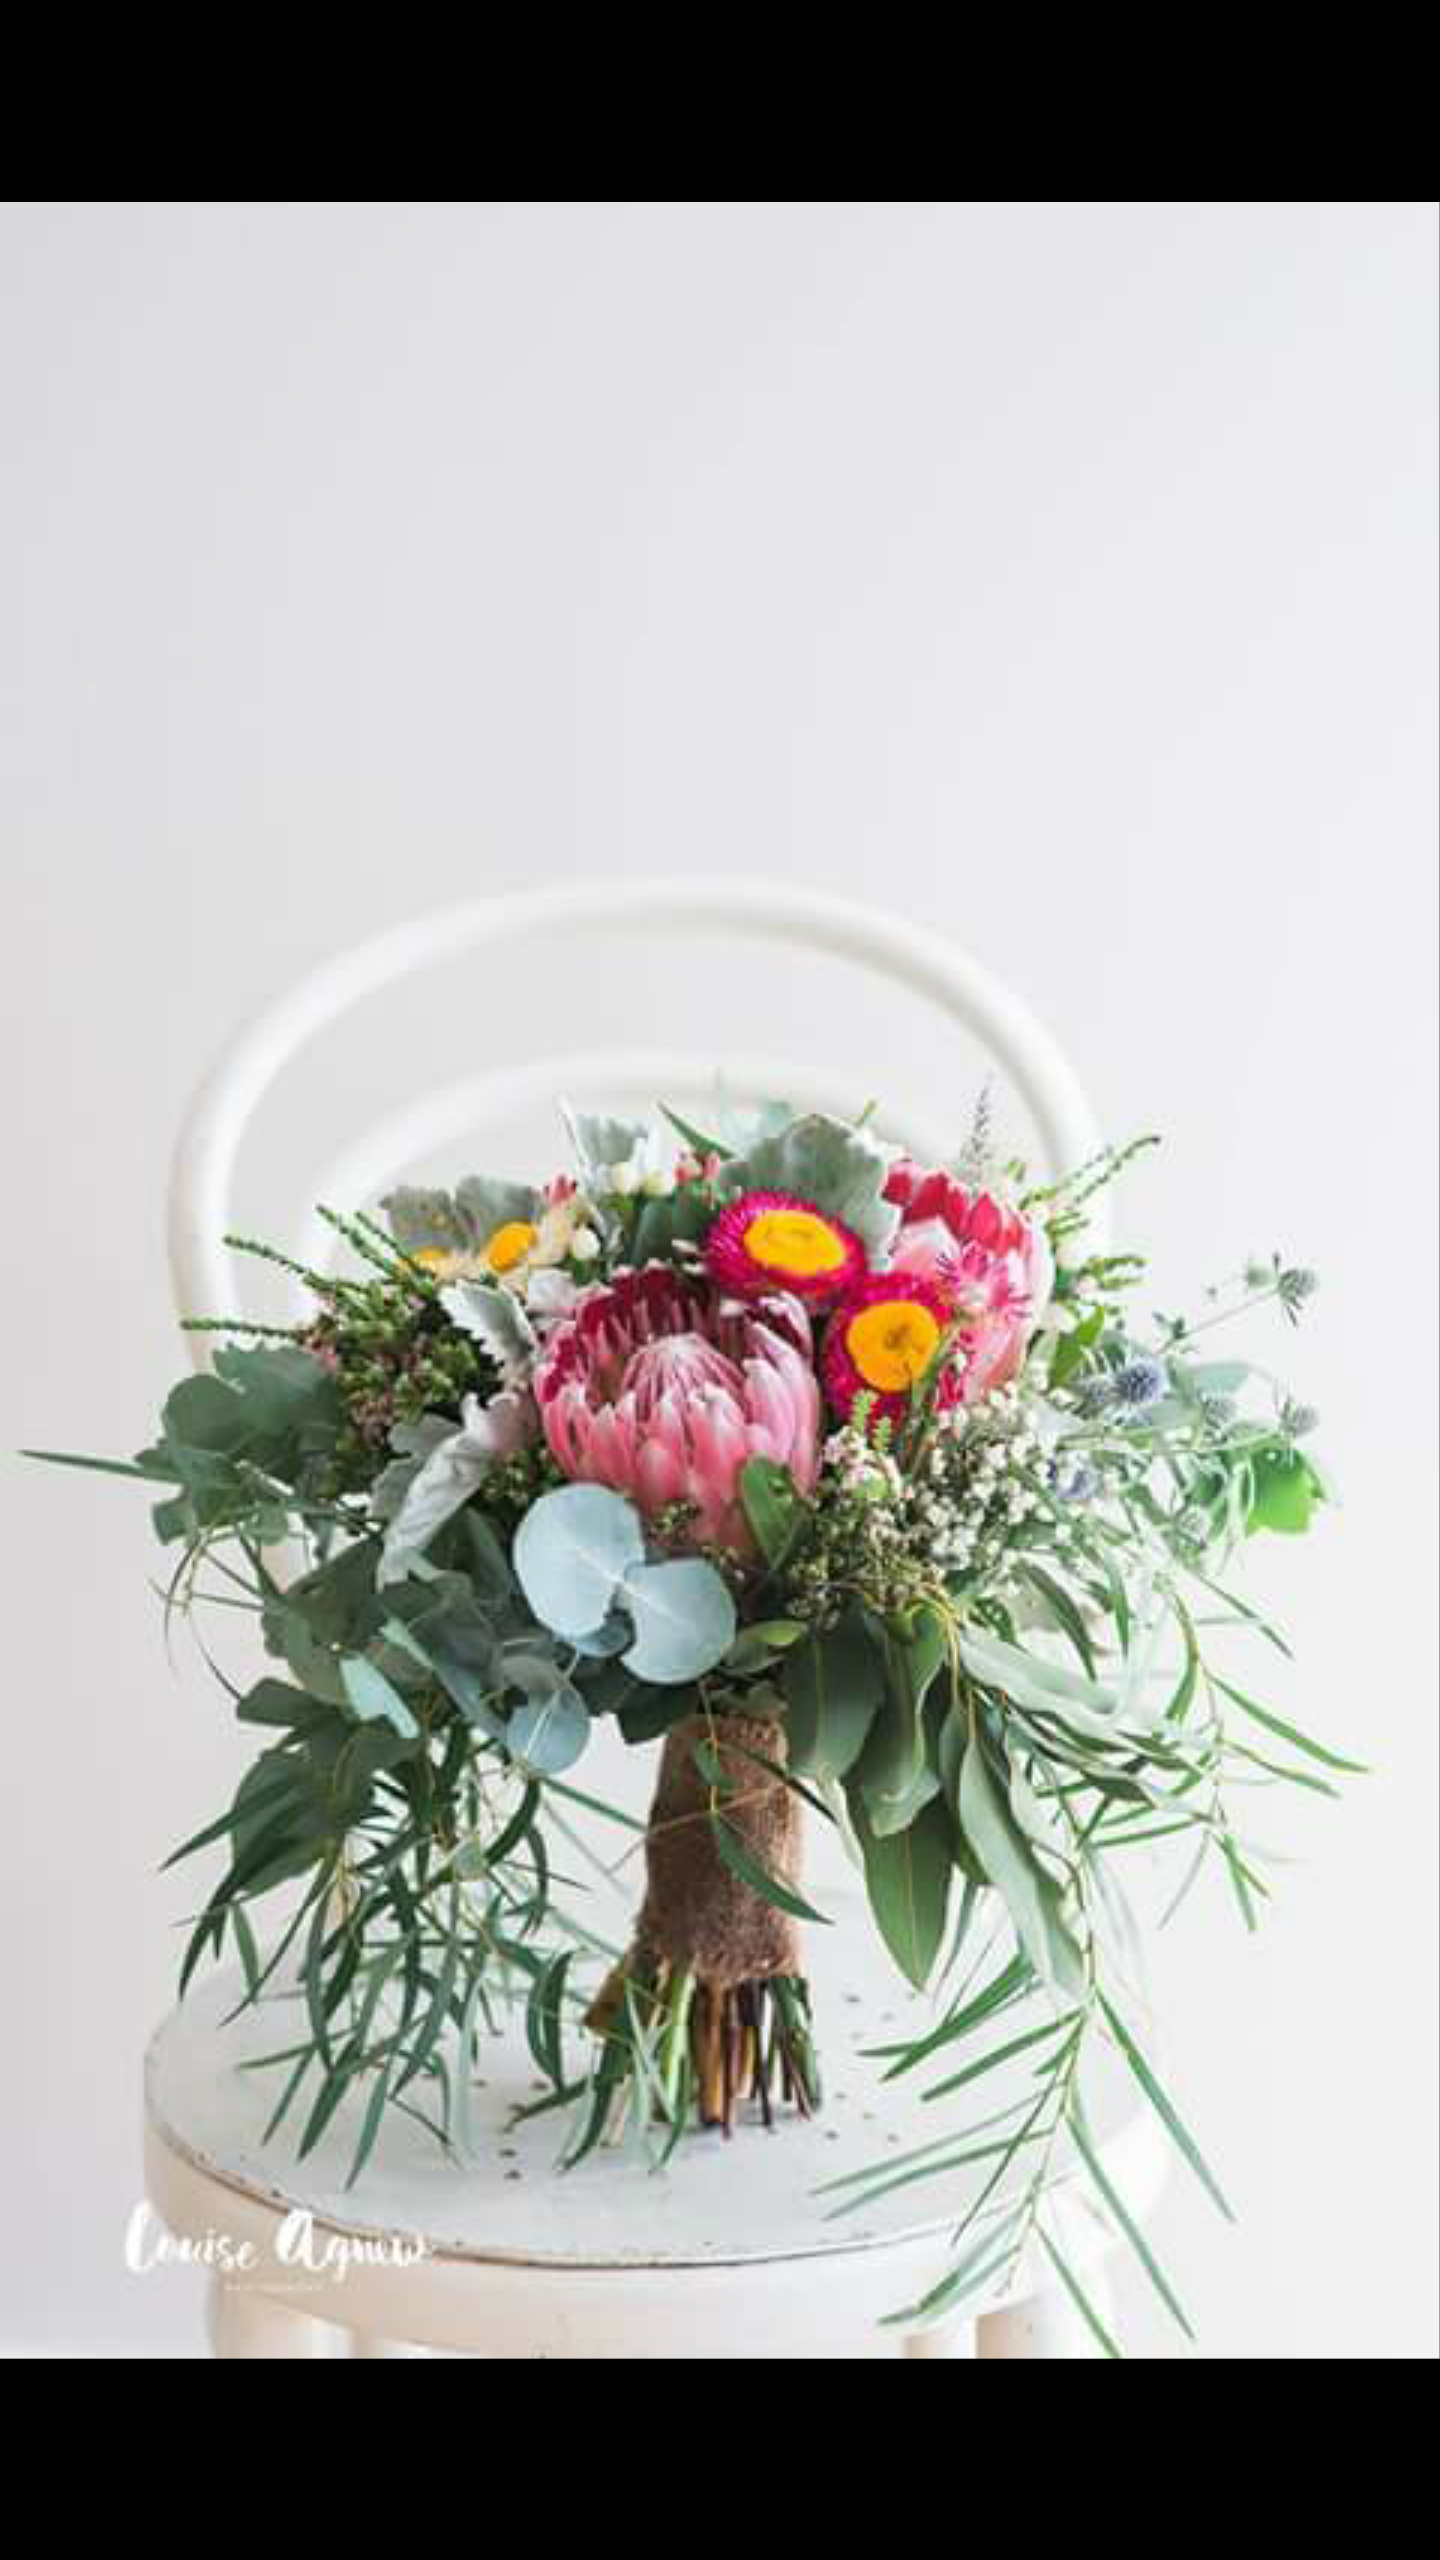 Bouquet by Margie our Florist. Photo by Louise Agnew Photography